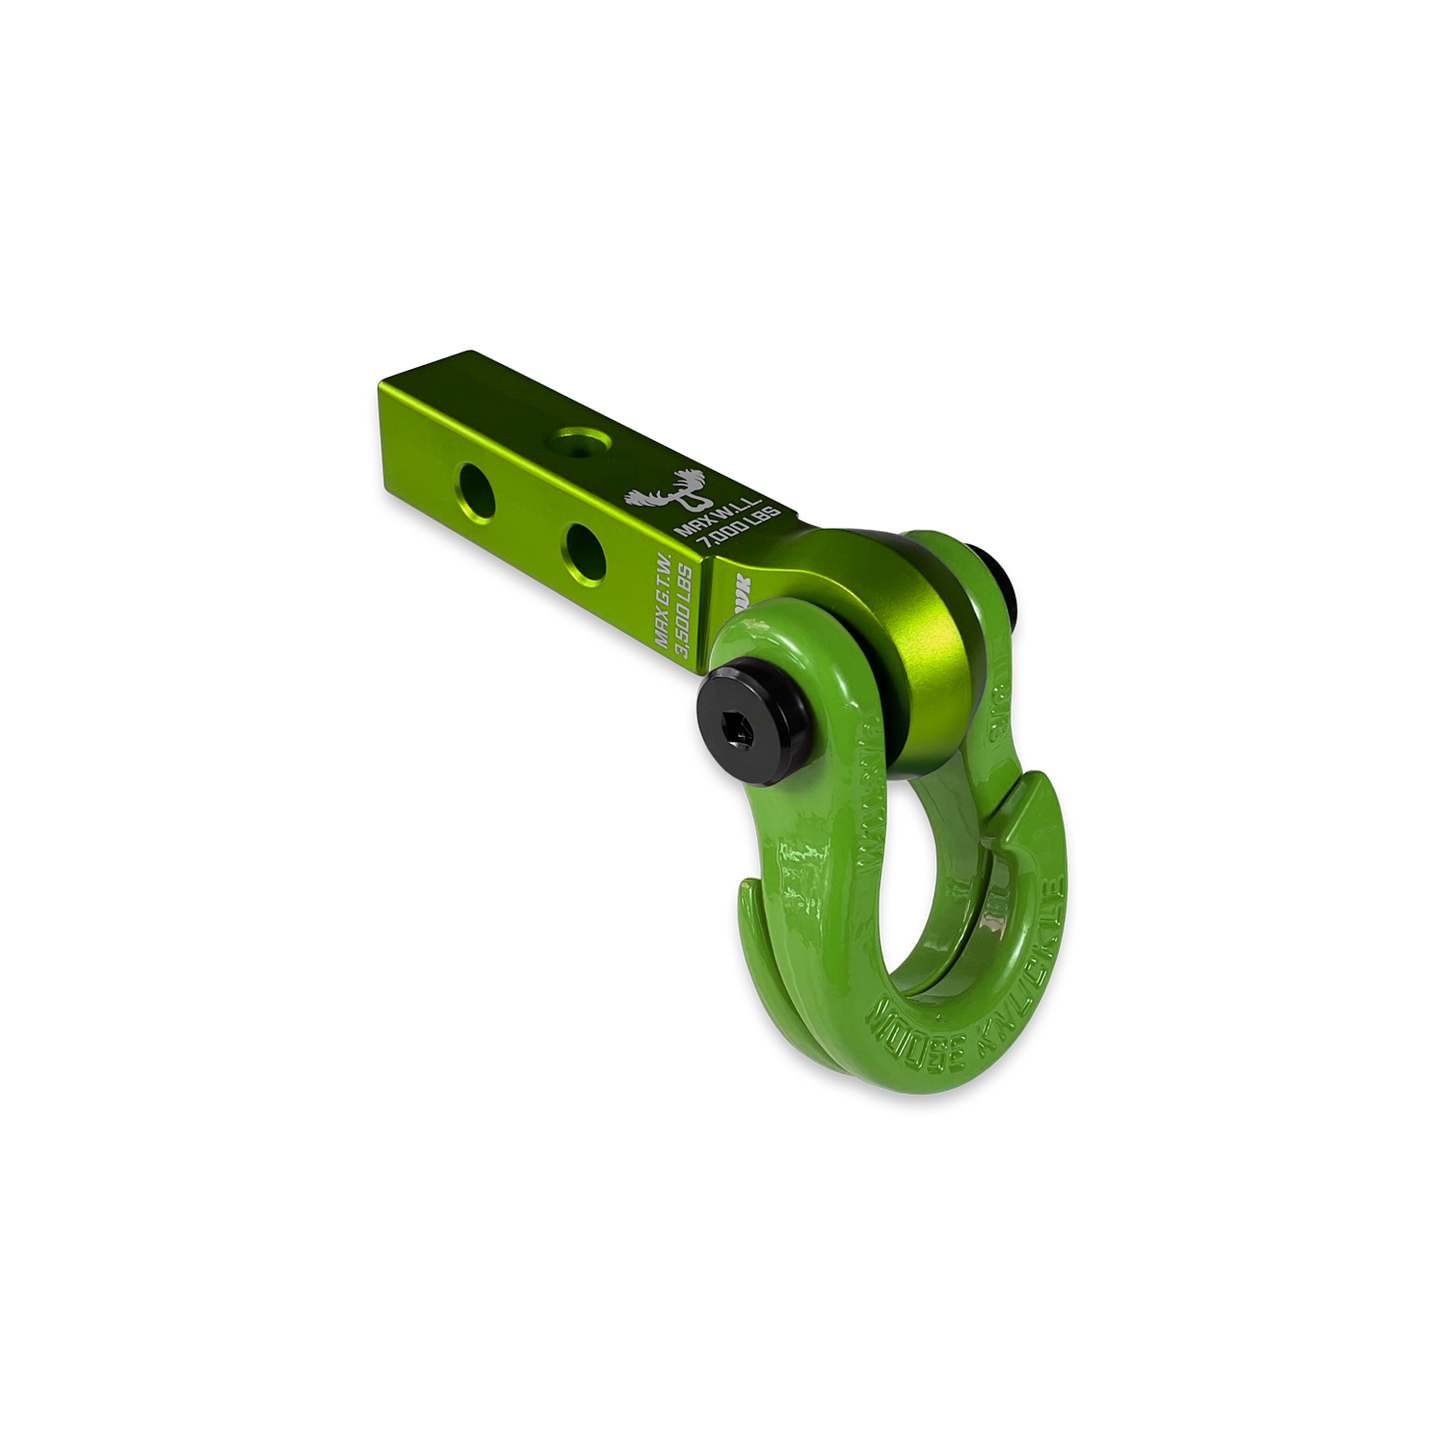 Jowl 5/8 Split Shackle & 1.25 Receiver (Bean Green and Sublime Green)